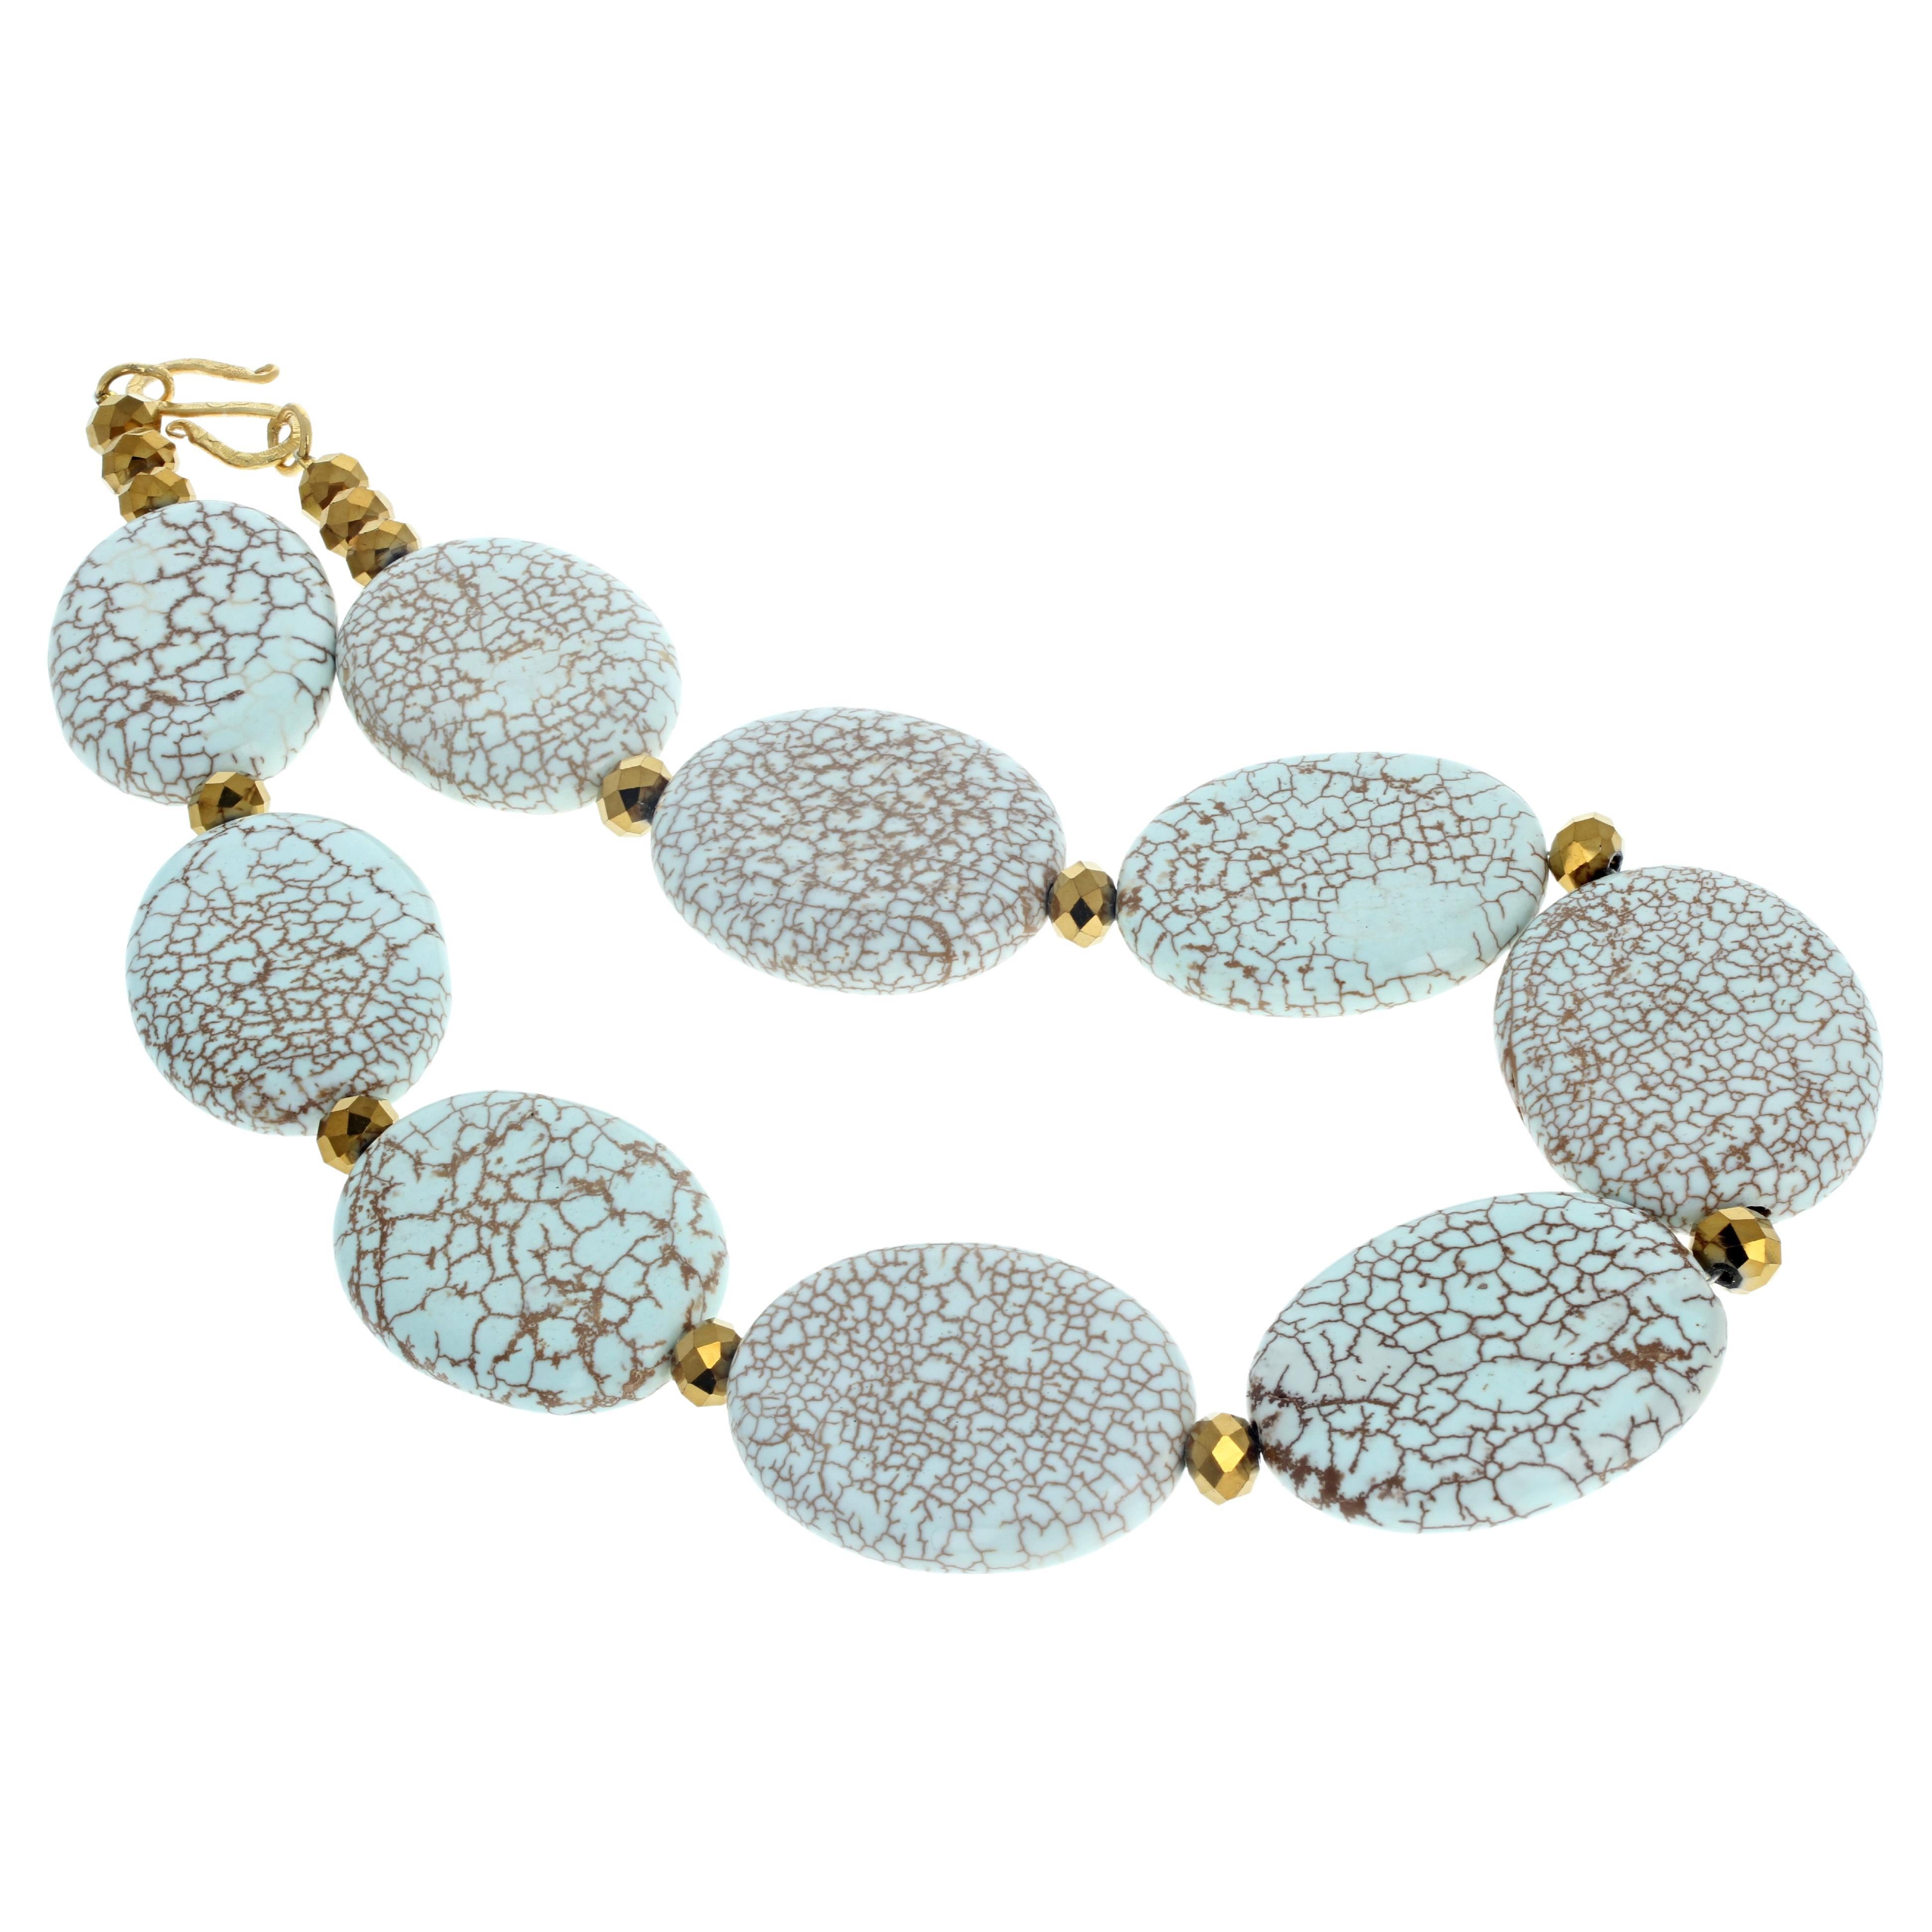 This interesting real natural Magnesite (approximately 20mm x 40mm) is set with goldy plated multi-faceted rondels (approximately 8mm) to show off the natural qualities of the Magnesites.  This fun-to-wear necklace  is 18 1/2inches long with an easy